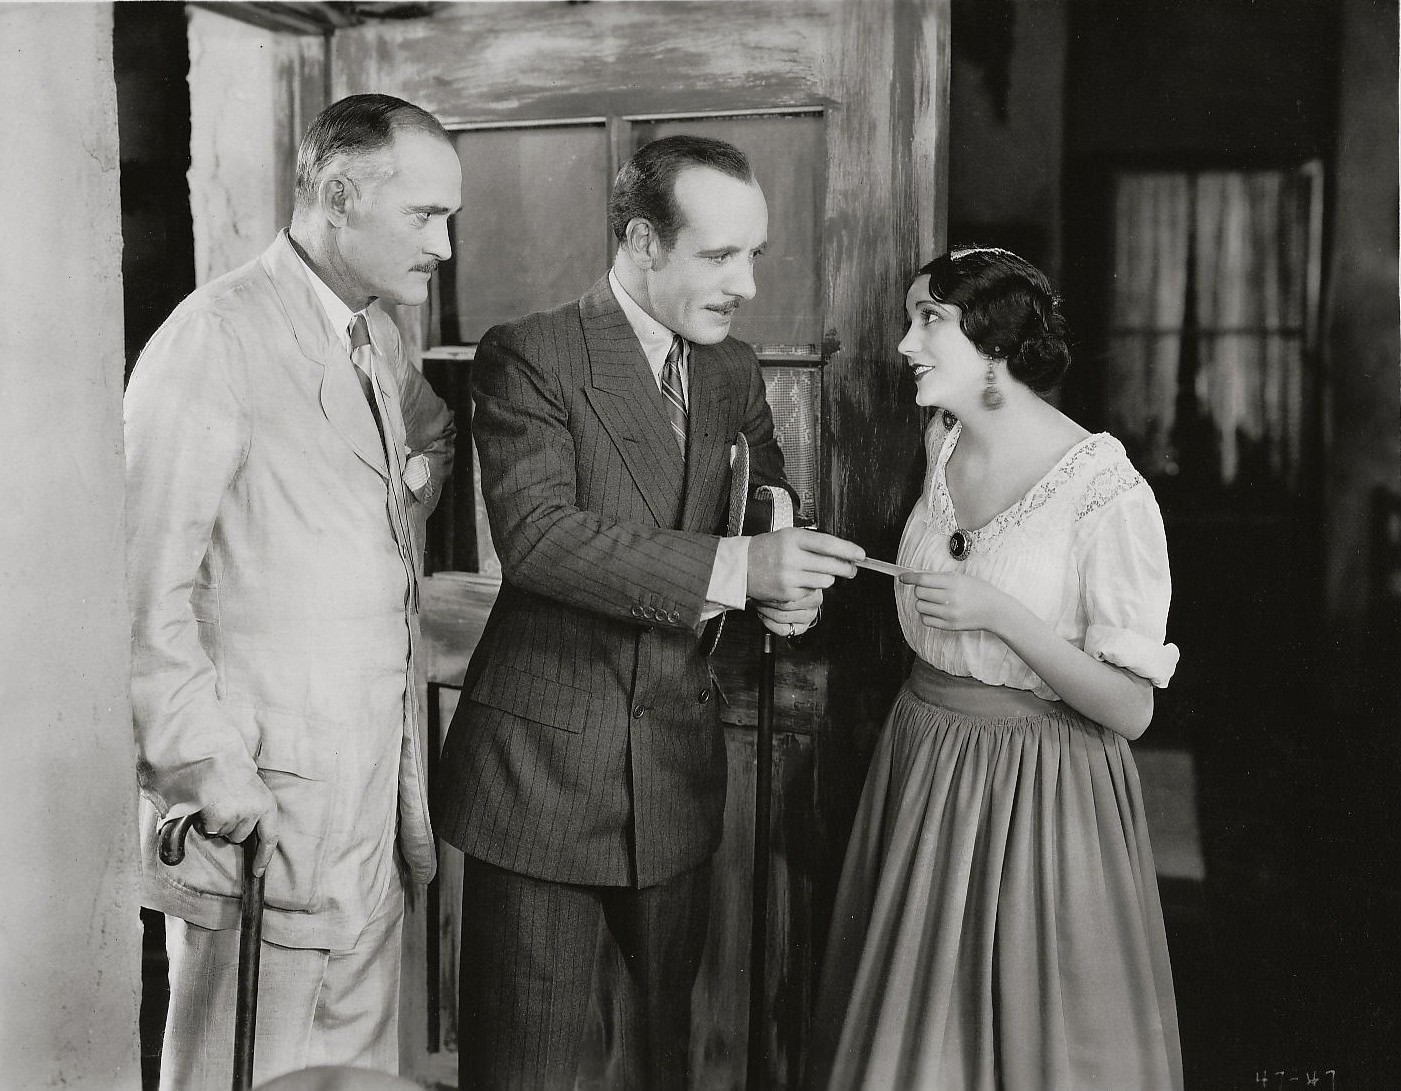 Barbara La Marr in "The Girl from Montmartre", 1926 with E. H. Calvert (on left), and Lewis Stone